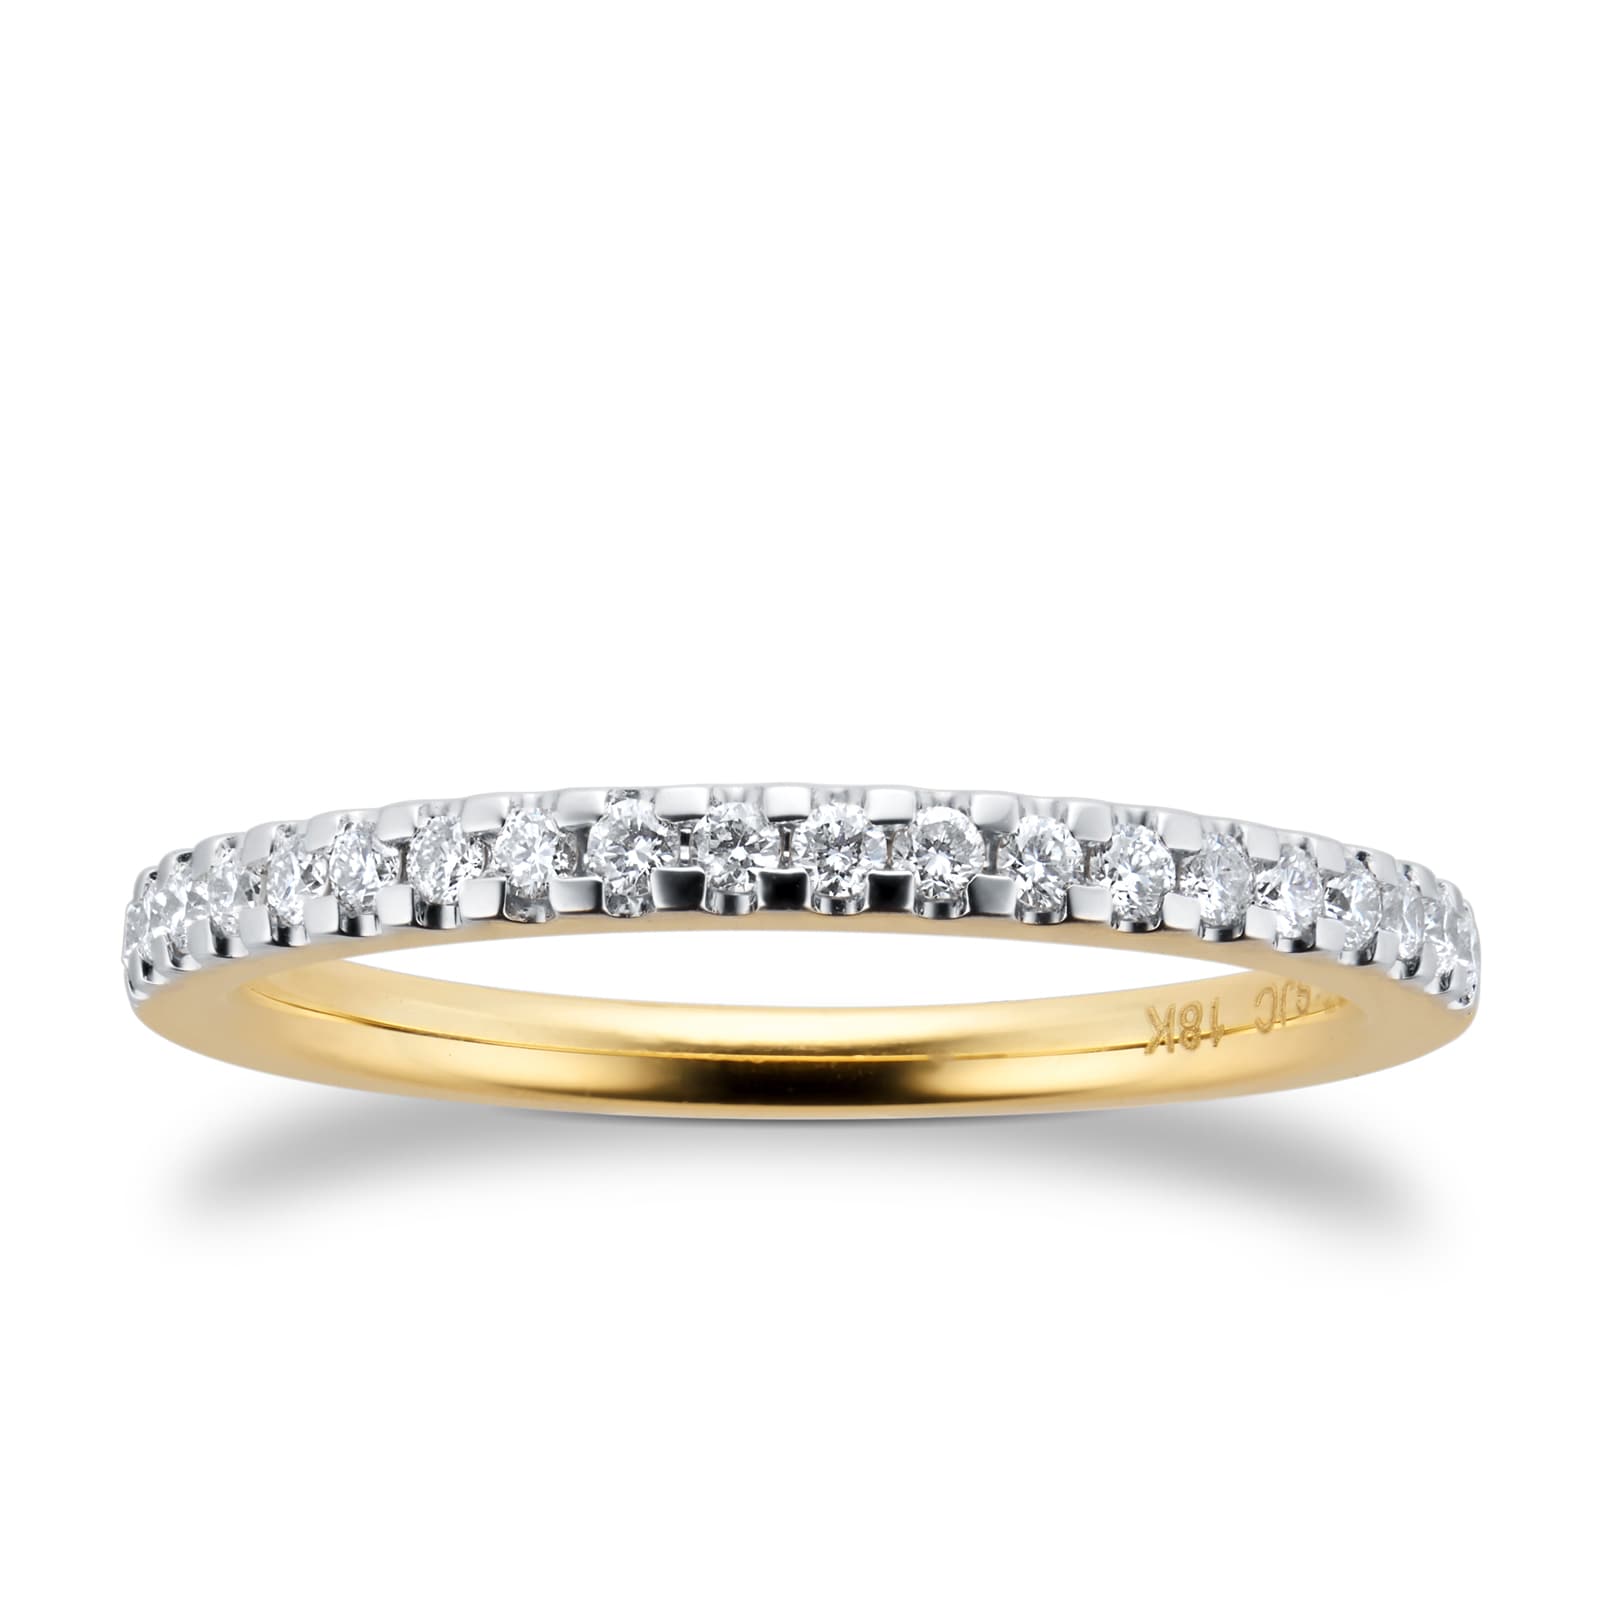 Brilliant Cut 020 Total Carat Weight Diamond Stacking Ring In 18 Carat Yellow Gold Ring Size O